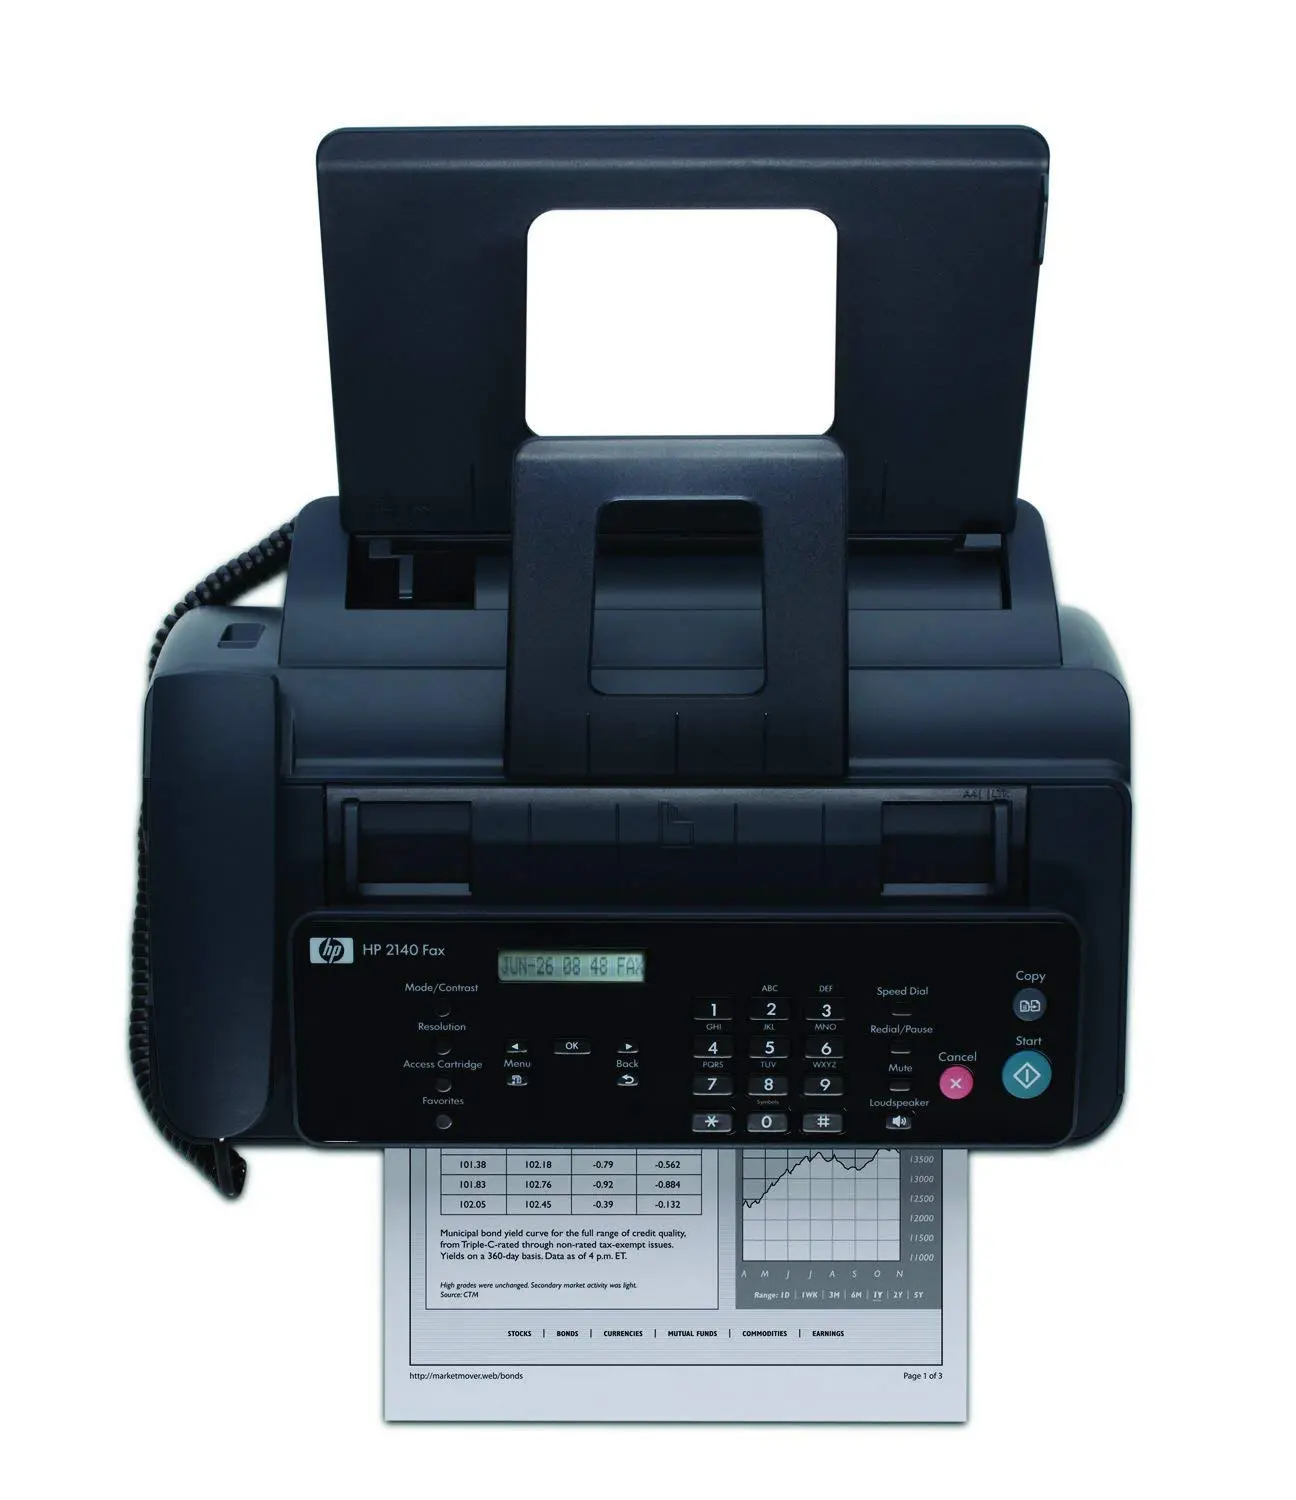 hewlett packard 2140 fax machine - How do I change the ink in my HP 2140 fax